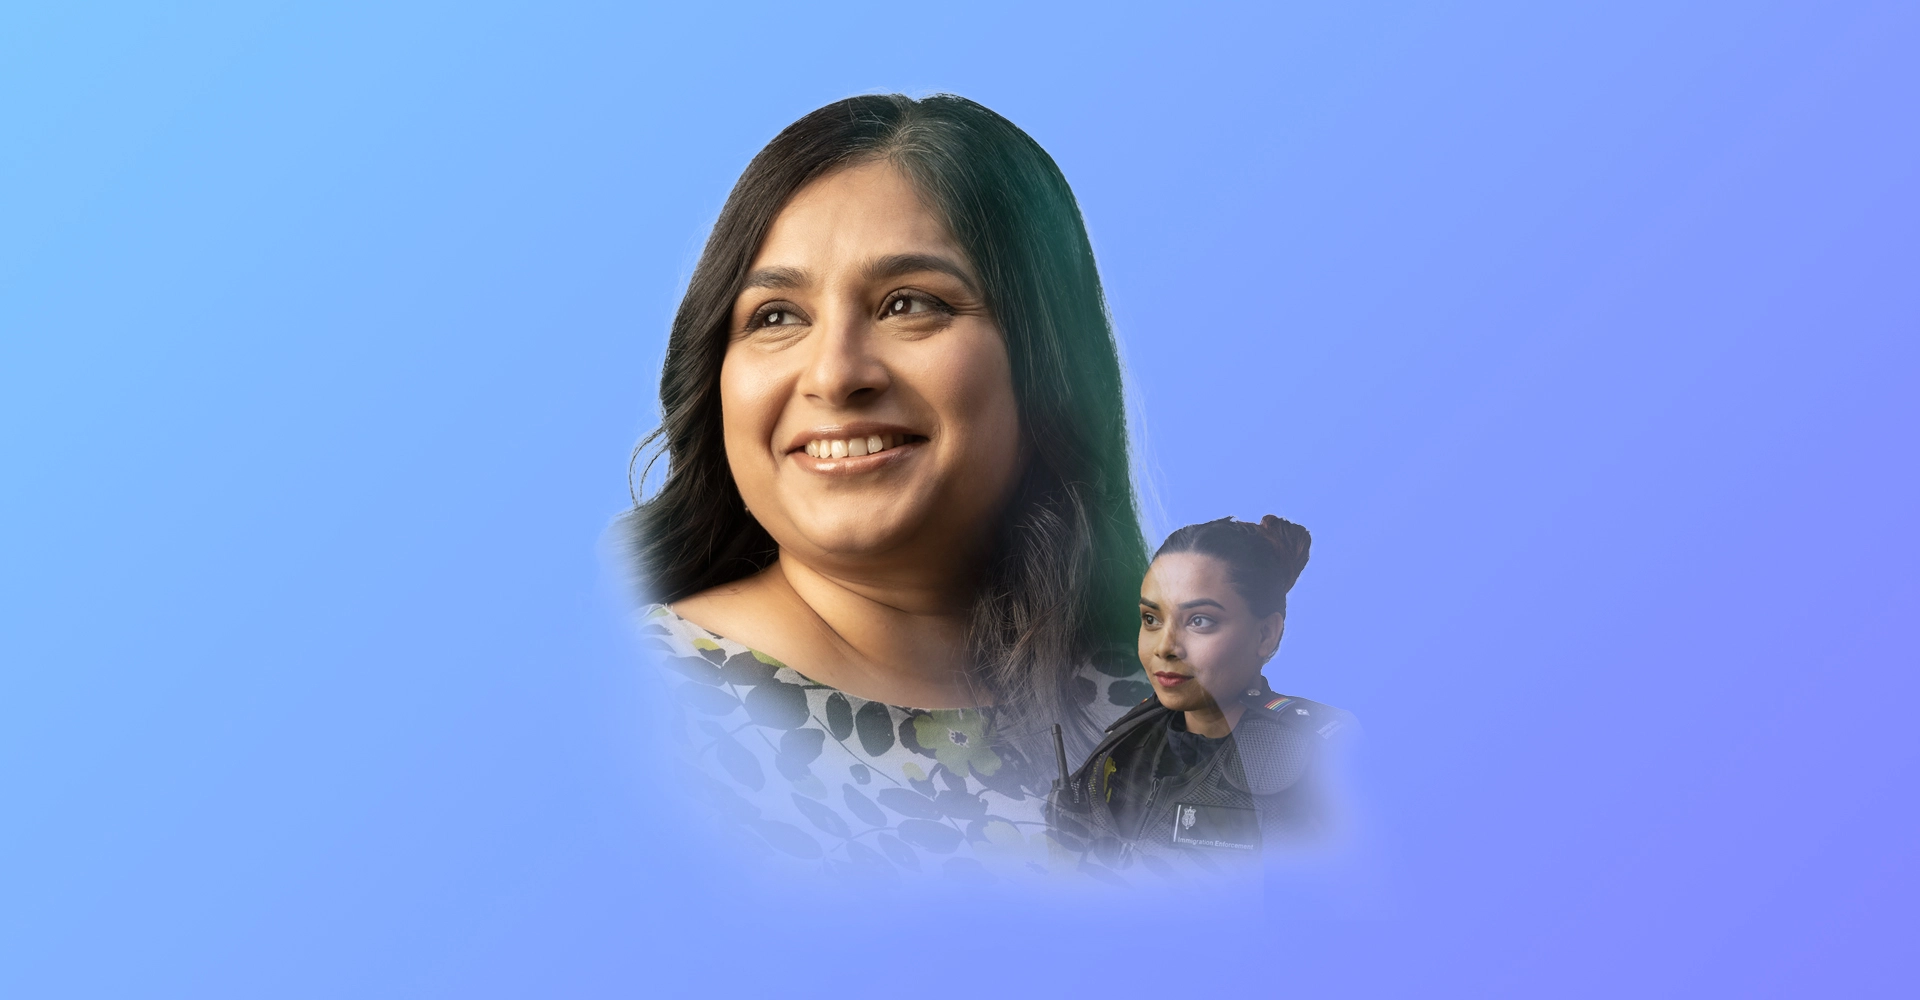 Home office - A woman smiling into the distance and another woman looking into the distance, with blue gradient background